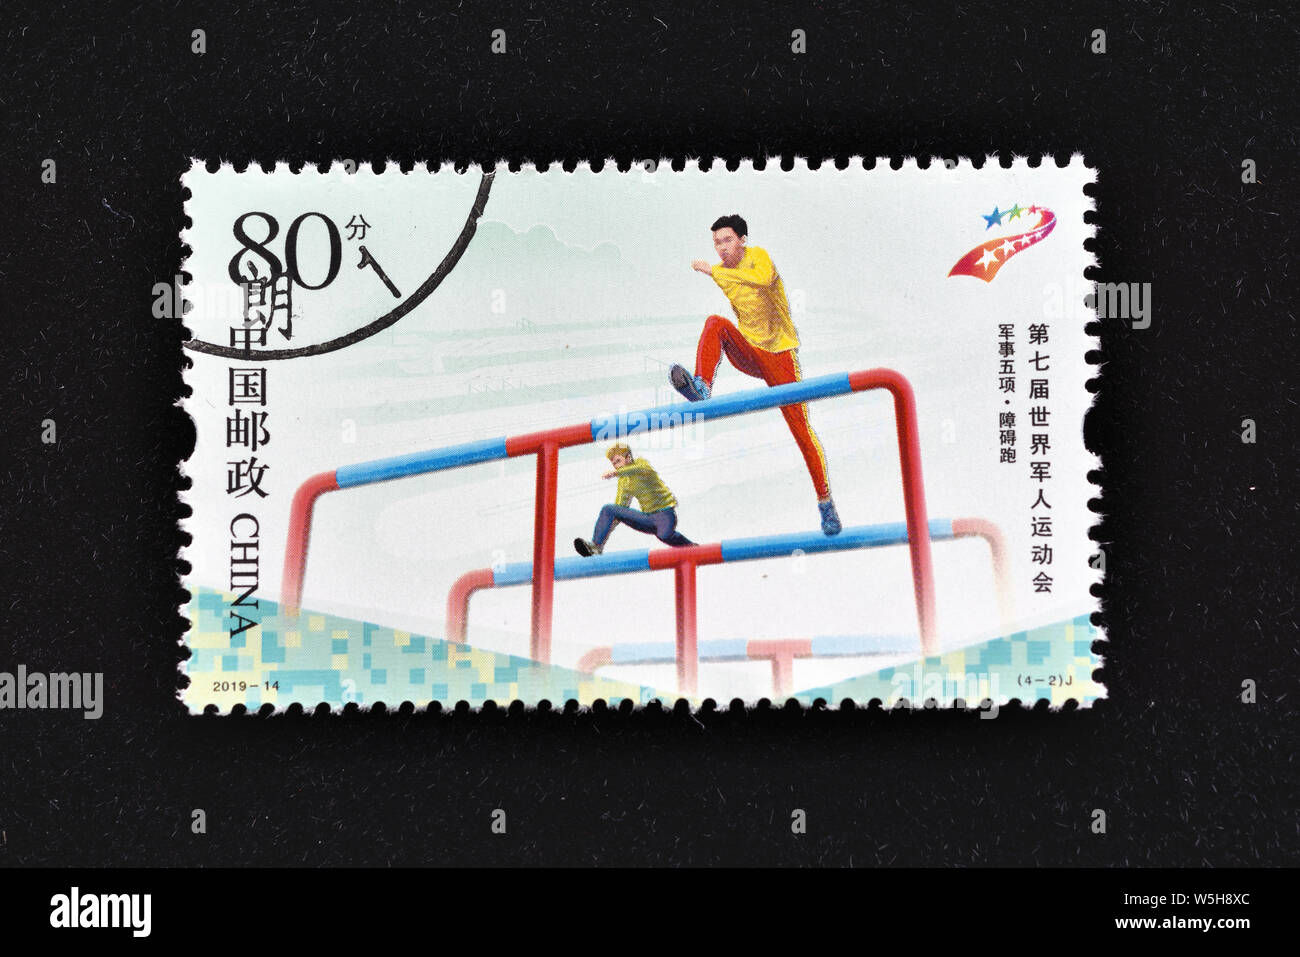 CHINA - CIRCA 2019: A stamp printed in China shows 2019-14 7th CISM Military World Games (Wuhan 2019) (4-1), Javelin - Track & Field, 80 fen, 50 * 30 Stock Photo